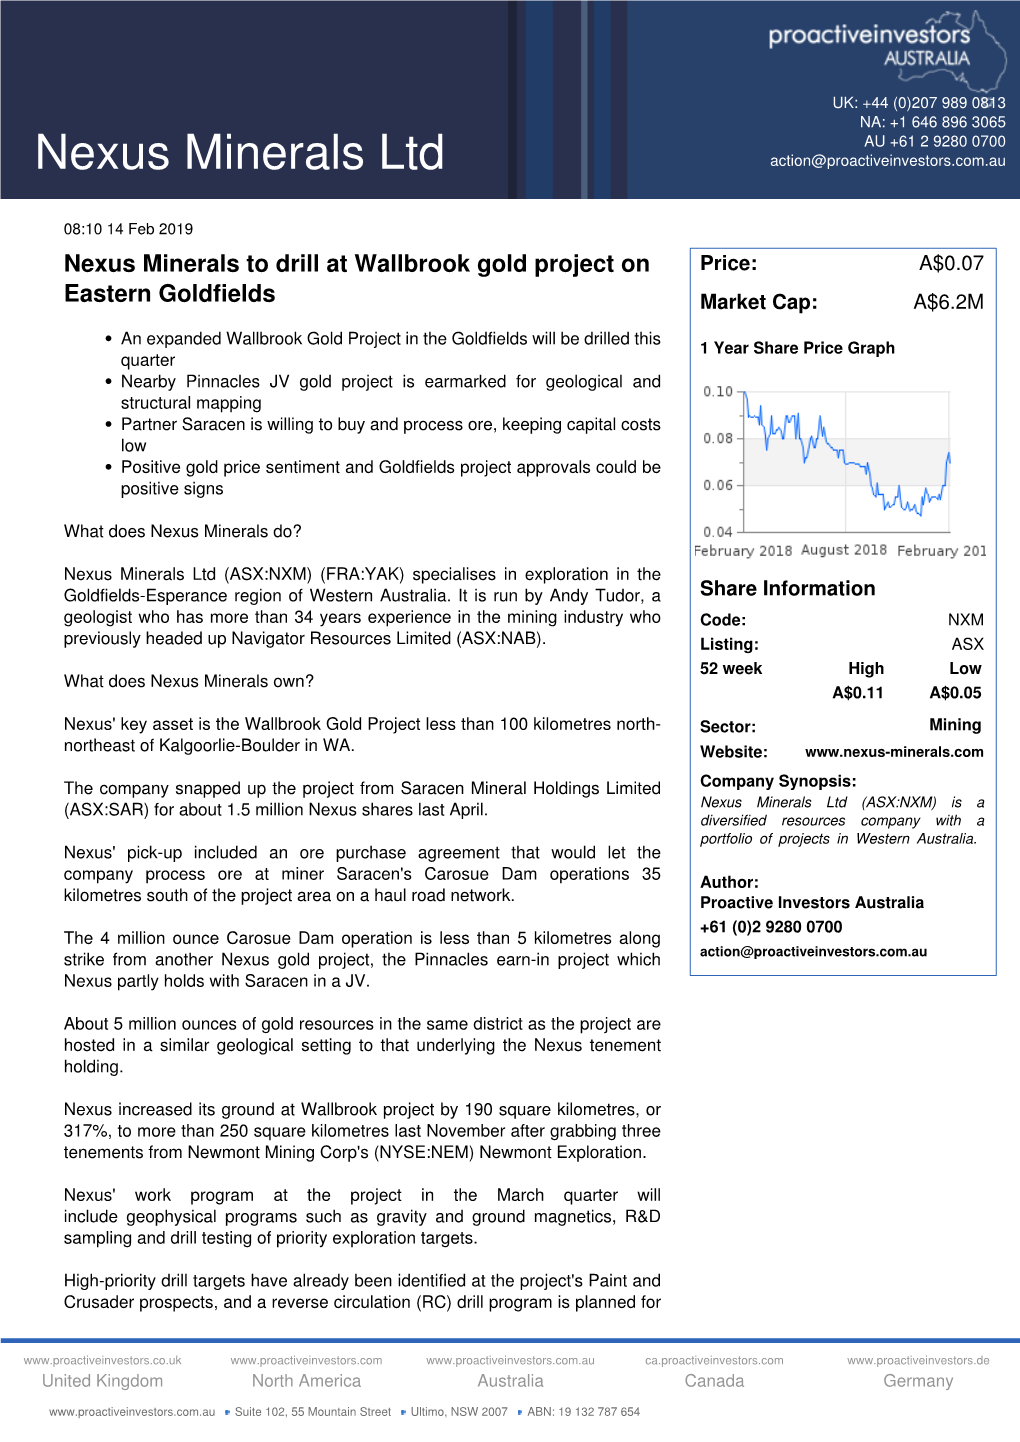 Nexus Minerals to Drill at Wallbrook Gold Project on Eastern Goldfields